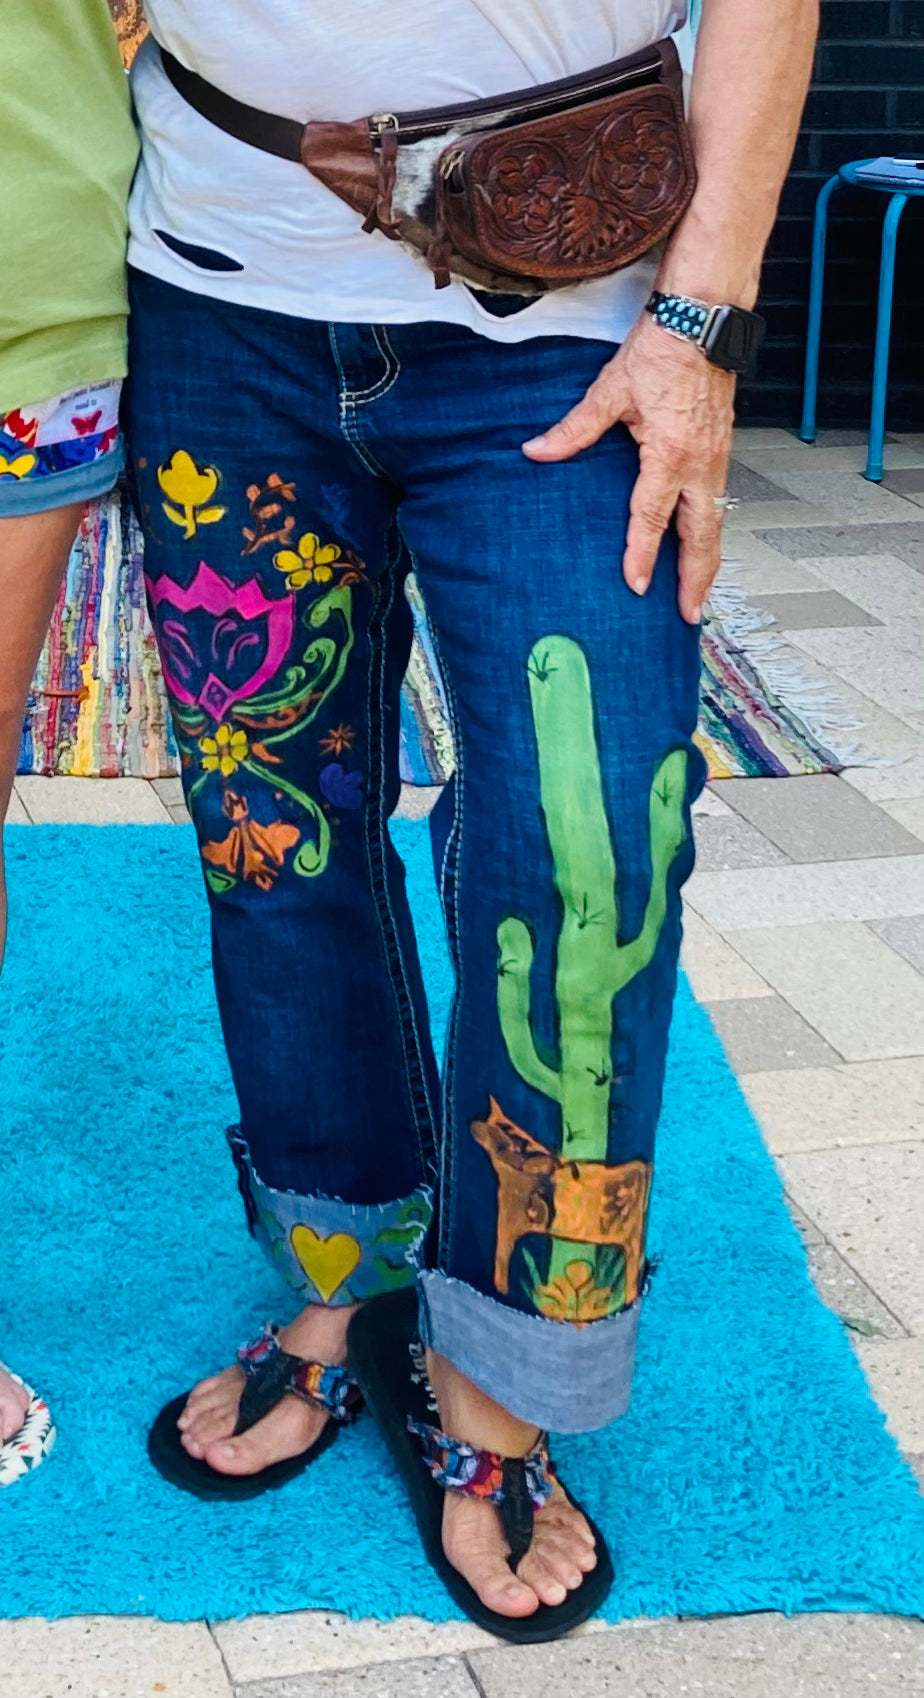 Don’t Donkey Around Cactus Mexican themed jeans